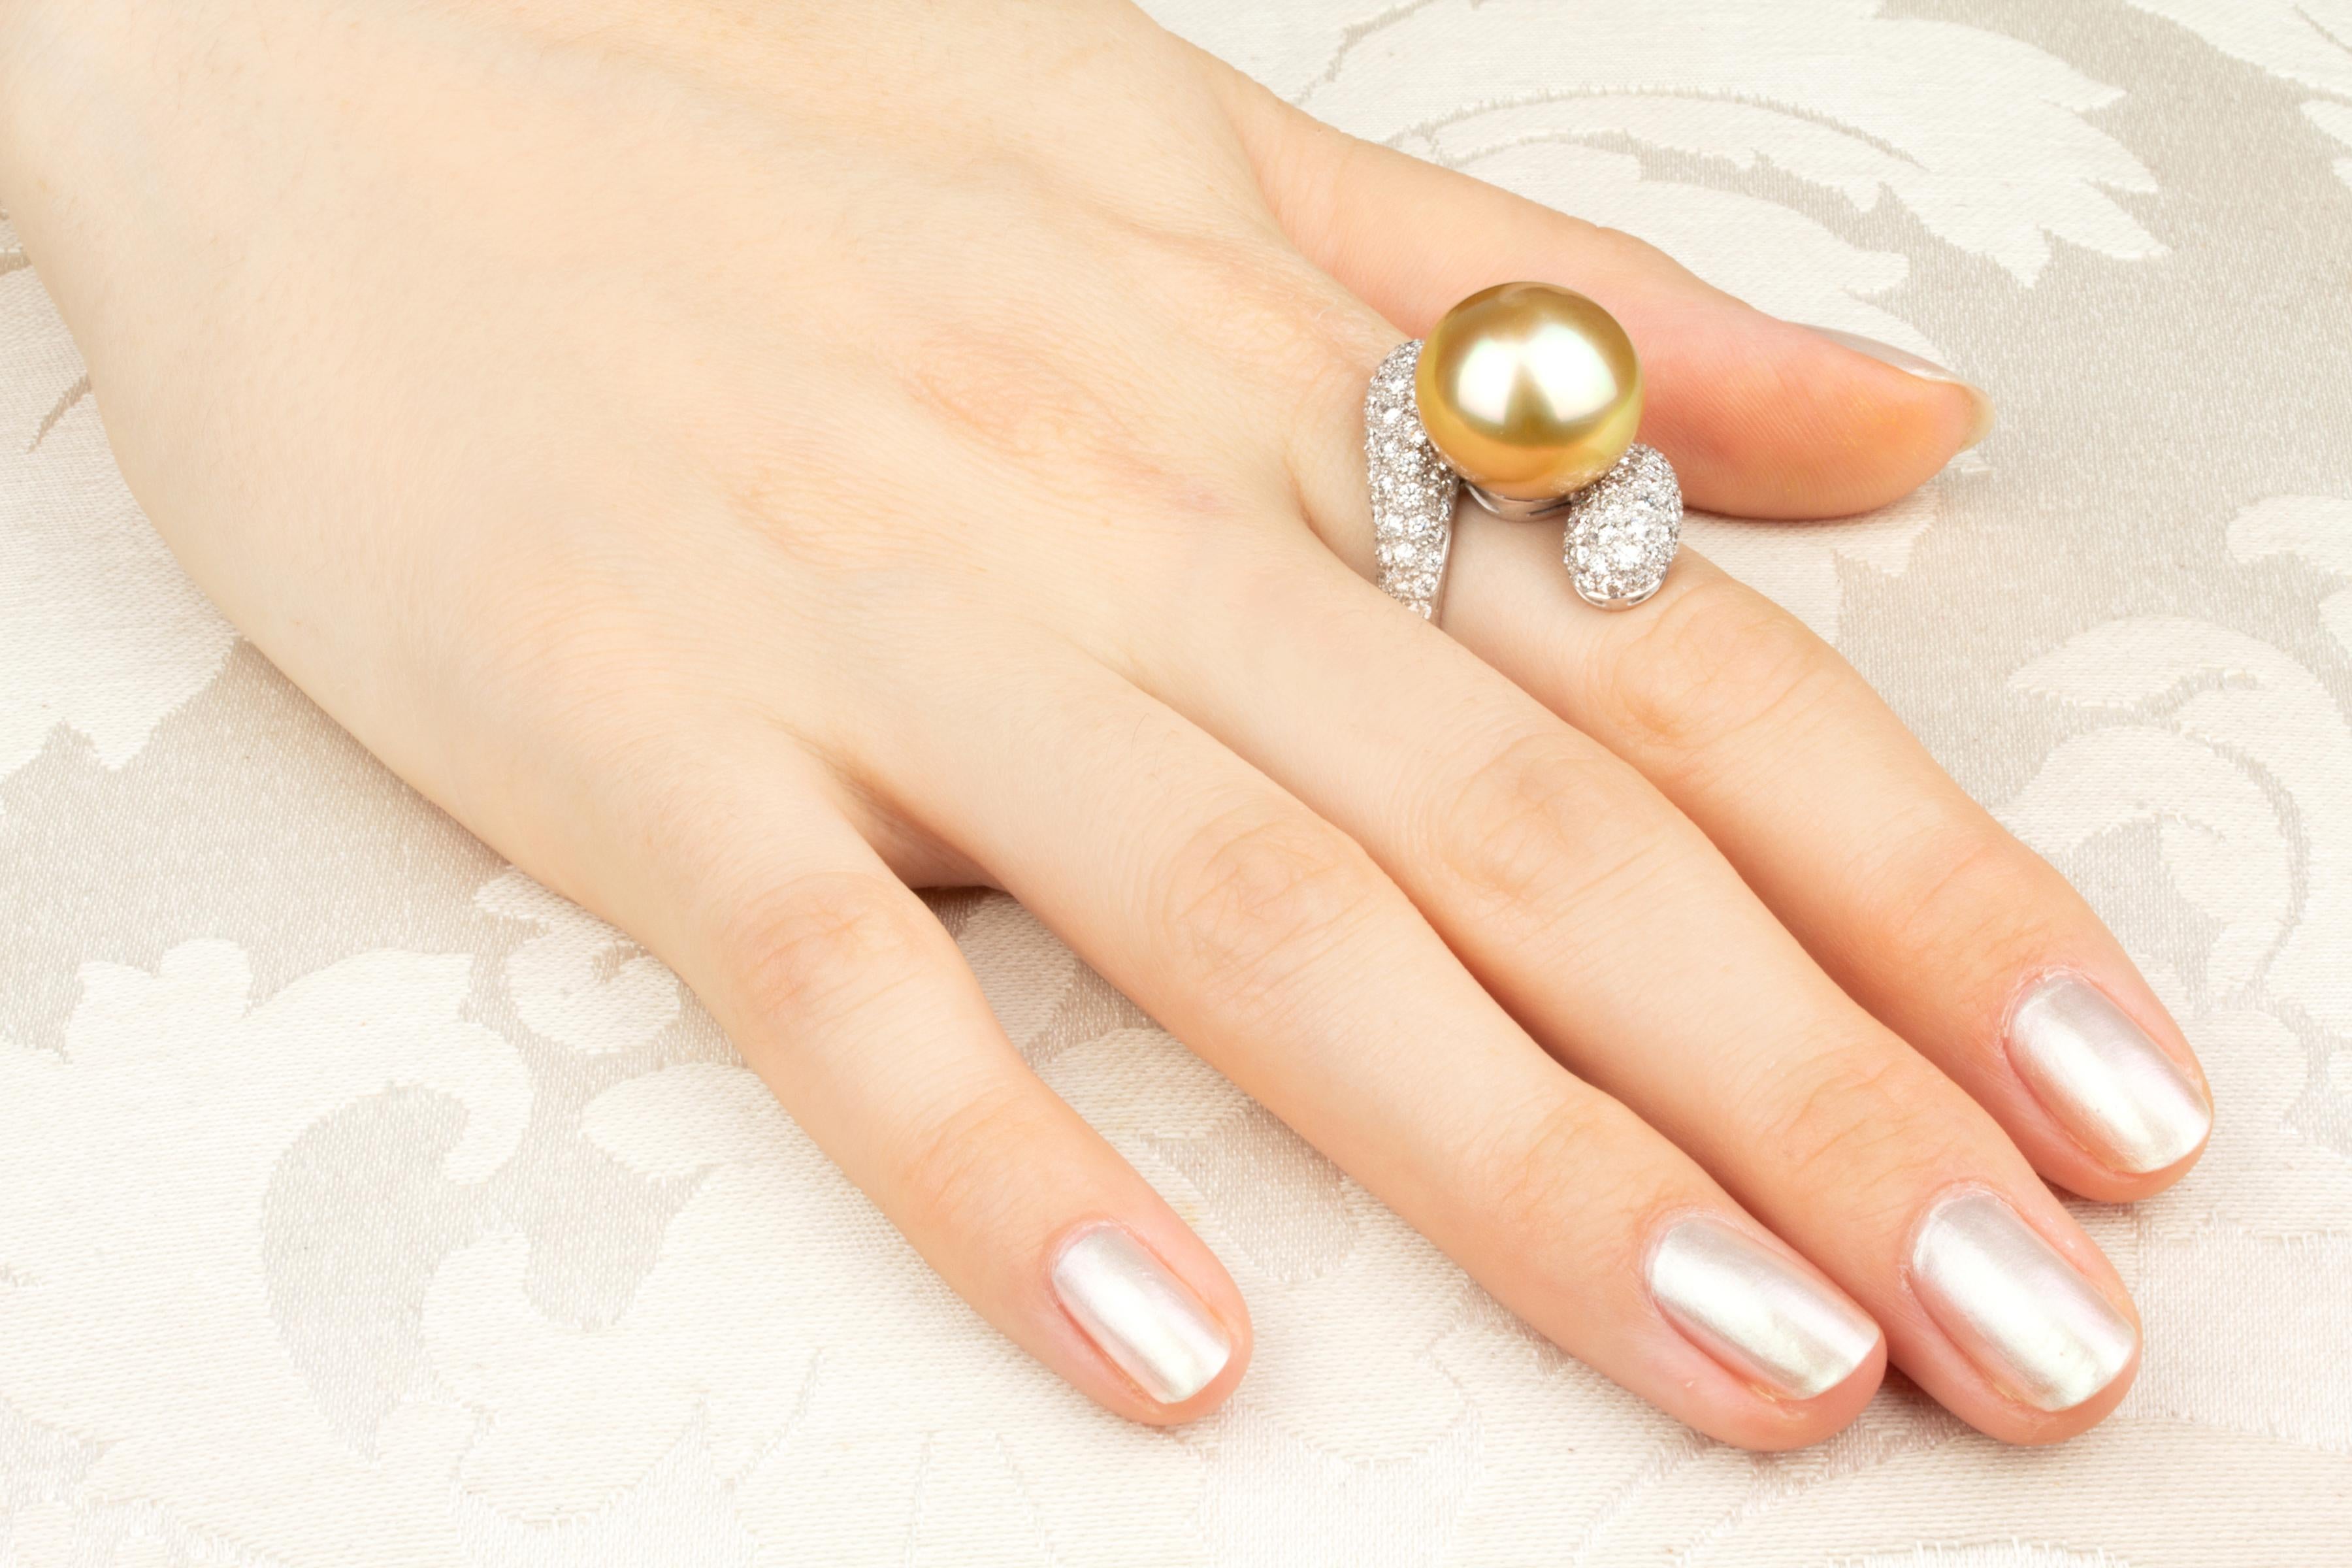 This golden South Sea pearl and diamond cocktail ring features a pearl of 15mm diameter. The pearl is untreated. It displays a splendid nacre and its natural color and luster have not been enhanced in any way. The pearl is suspended on a crossover